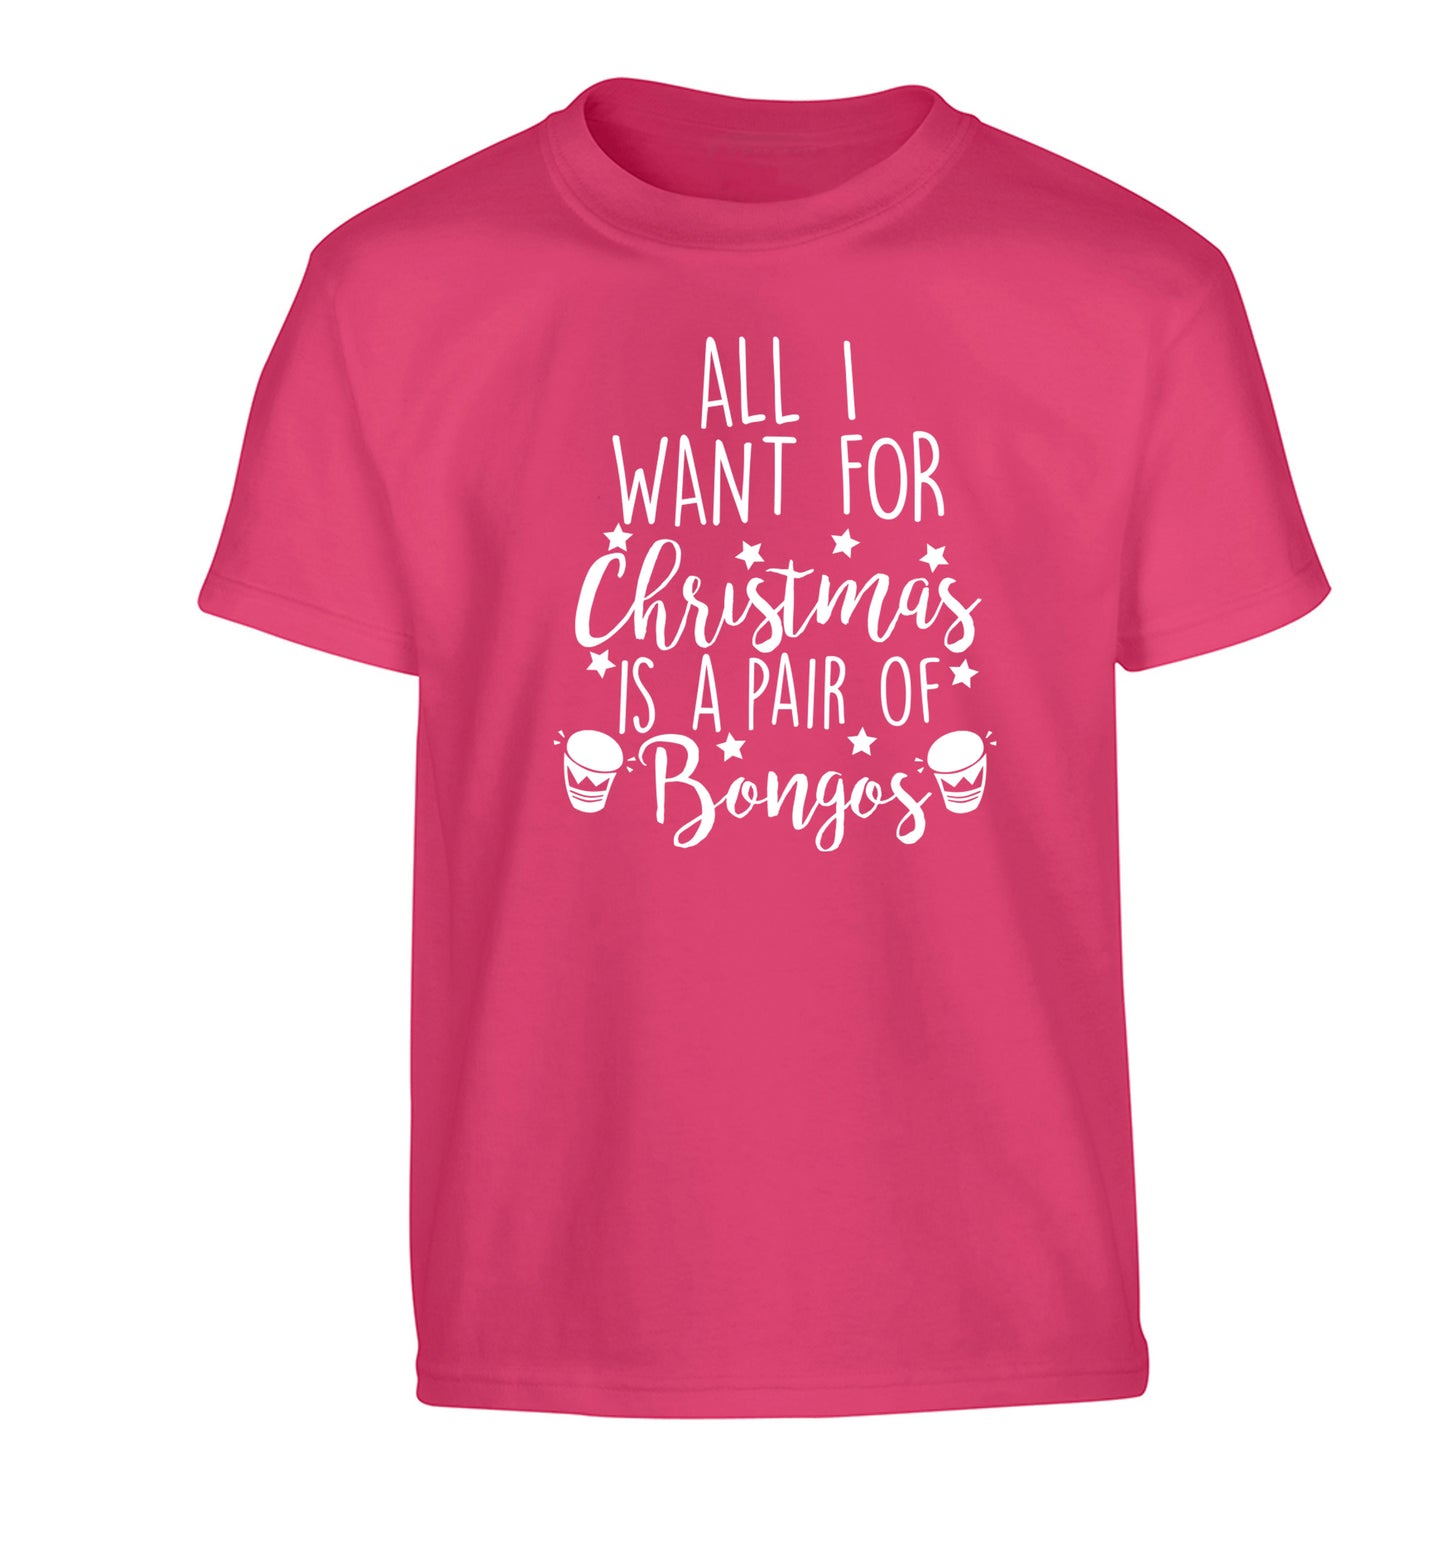 All I want for Christmas is a pair of bongos! Children's pink Tshirt 12-14 Years